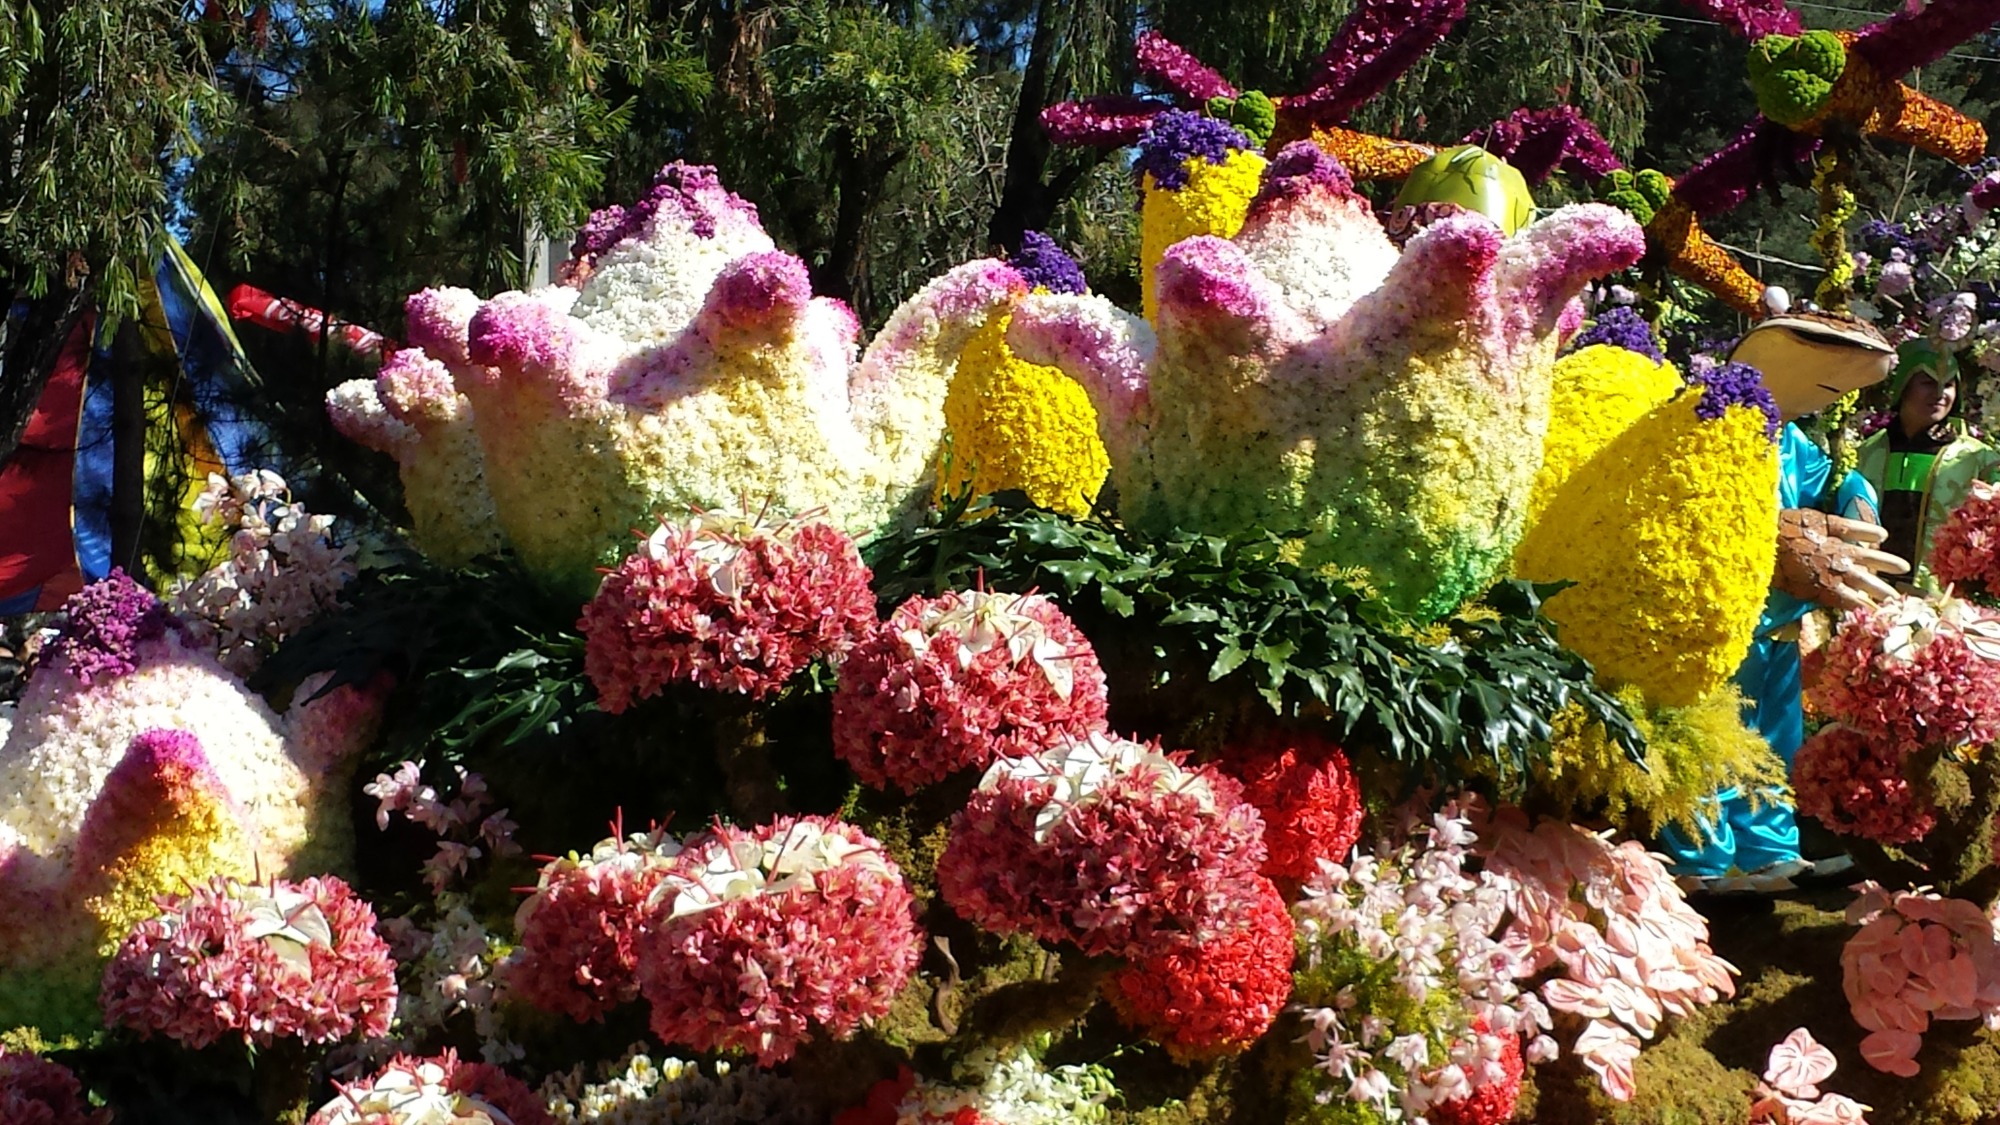 Panagbenga, the flower festival Baguio Philippines The Golden Scope